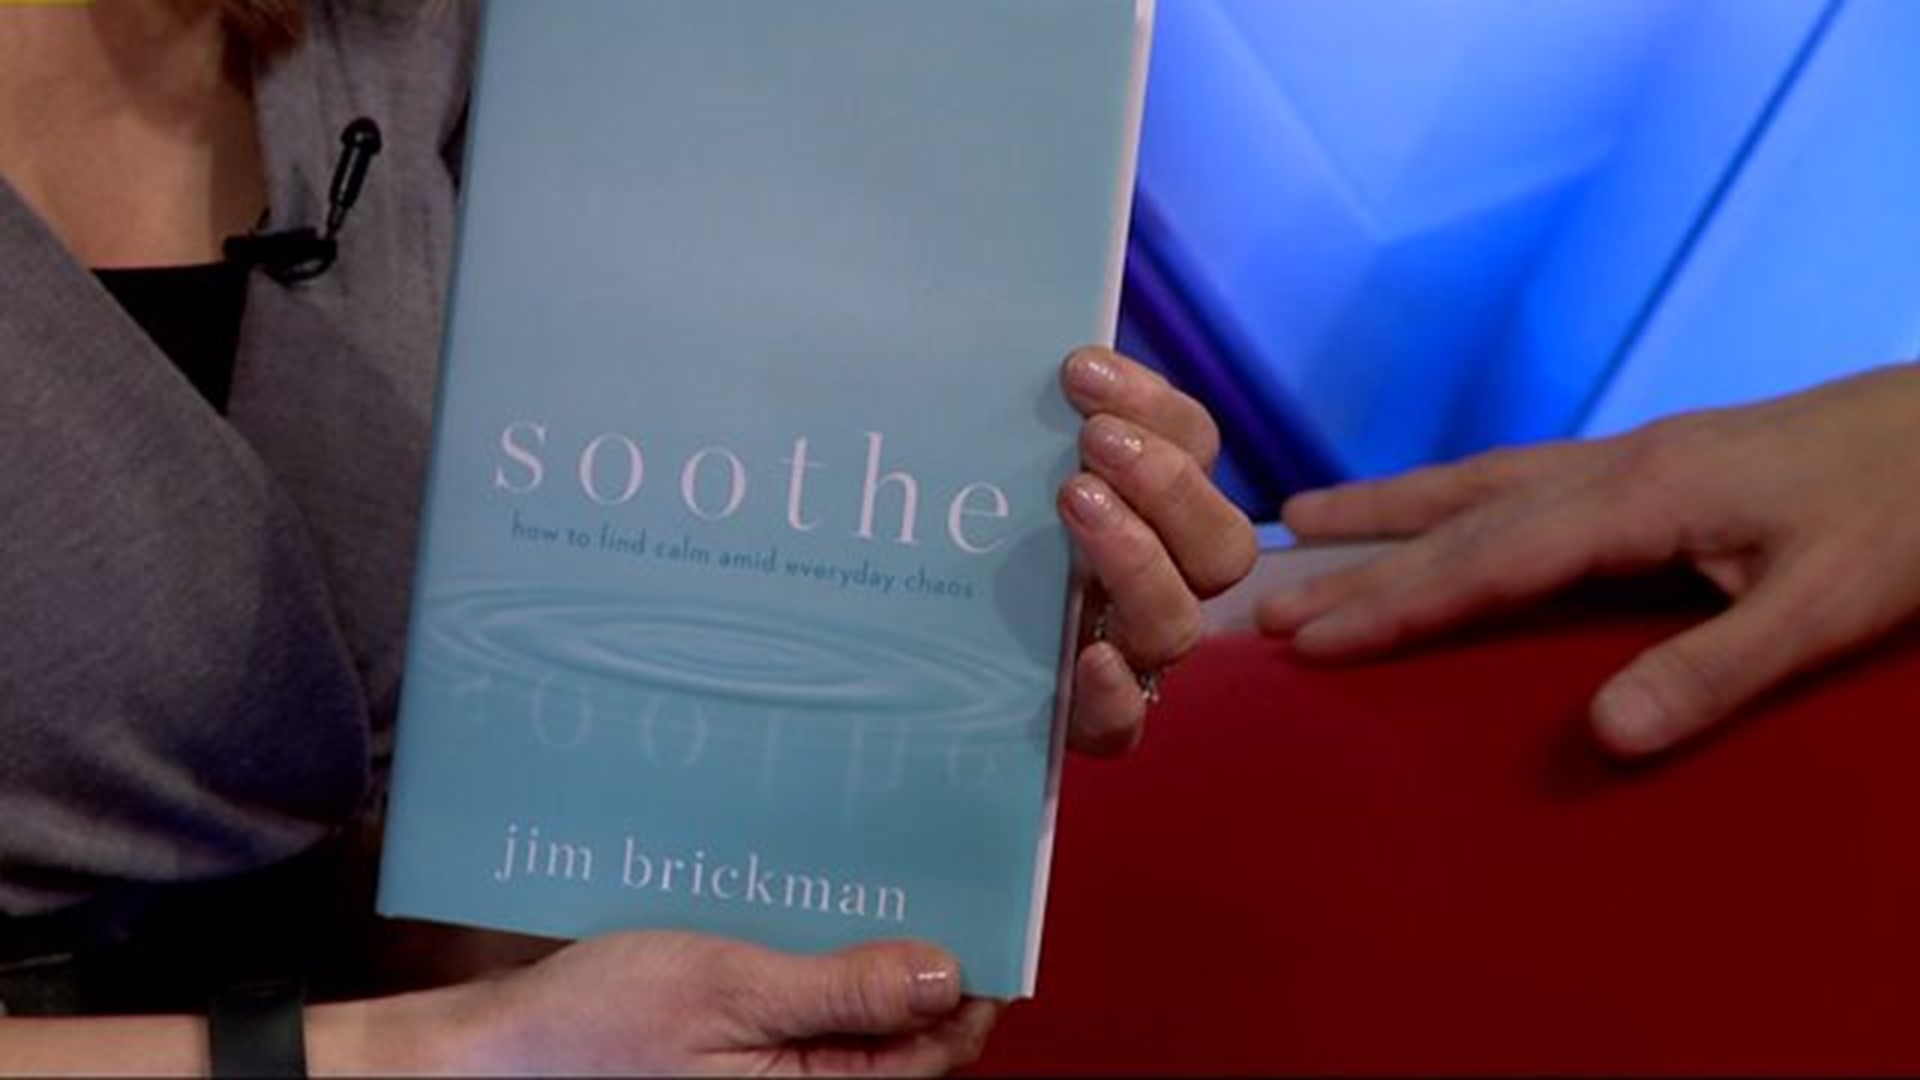 Songwriter and pianist Jim Brickman discusses new book "Sooth"